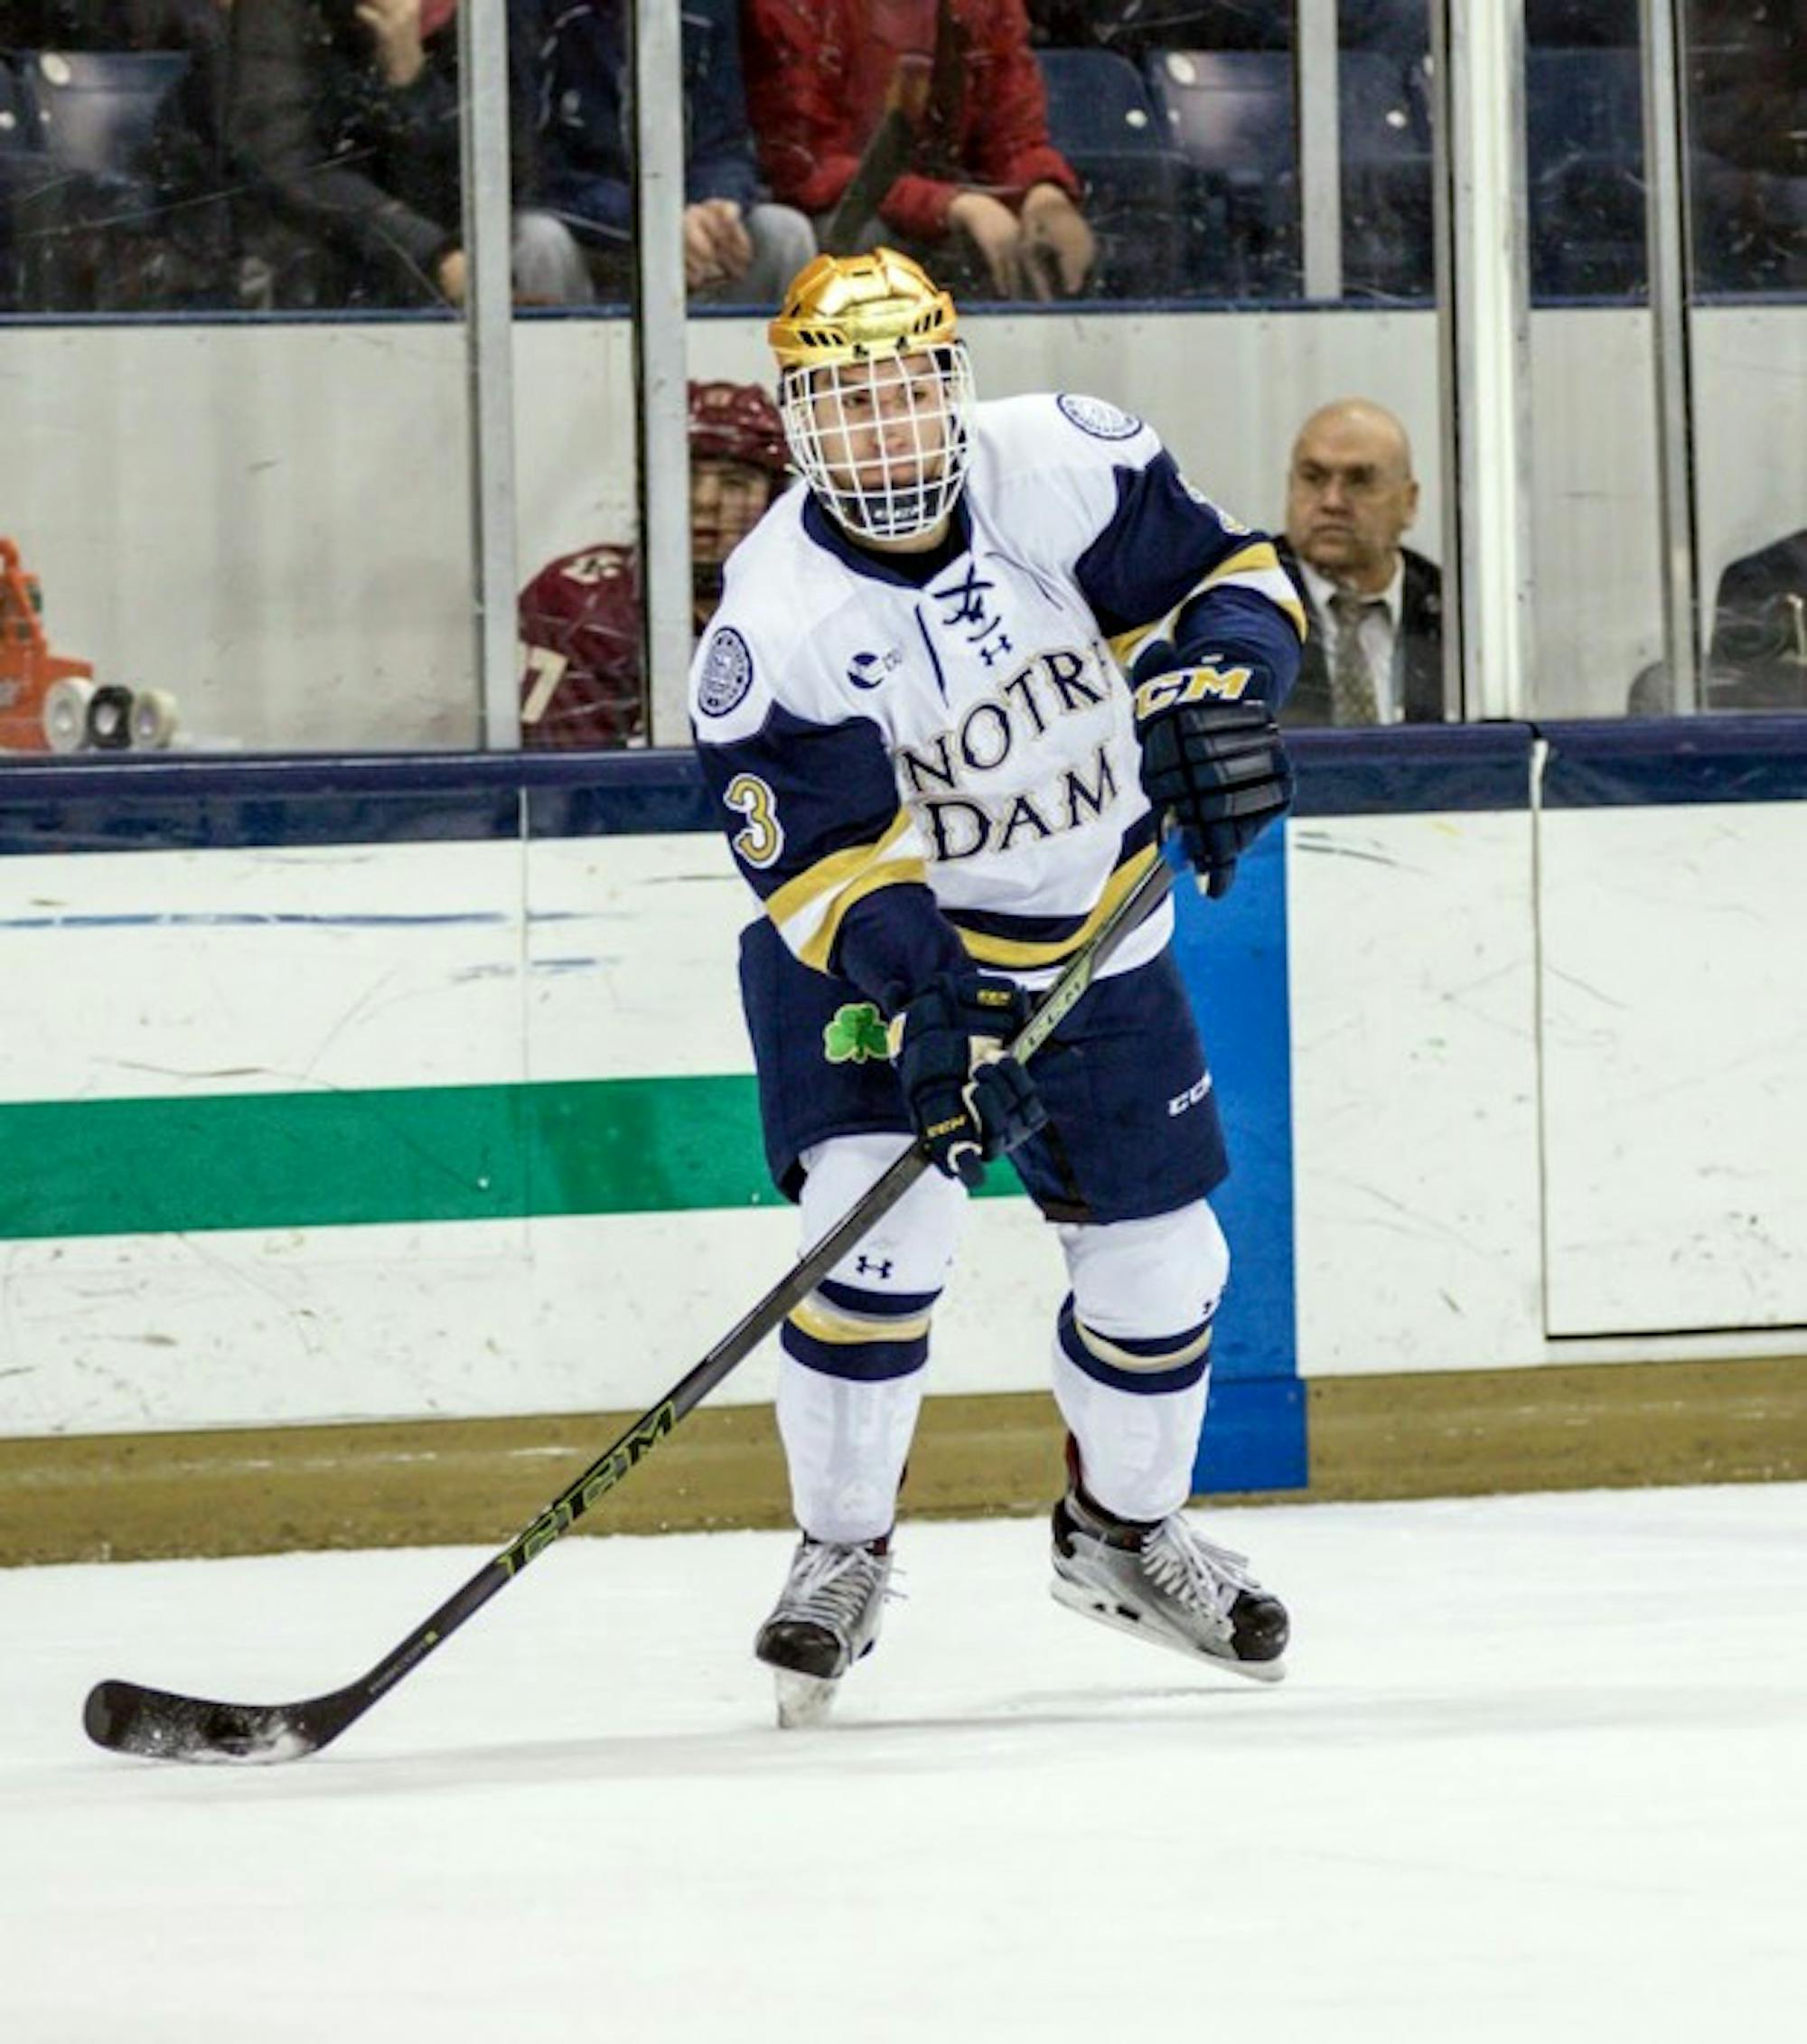 Irish sophomore Jordan Gross awaits a pass on the power play during Notre Dame’s 4-0 loss to Boston College on Friday night.